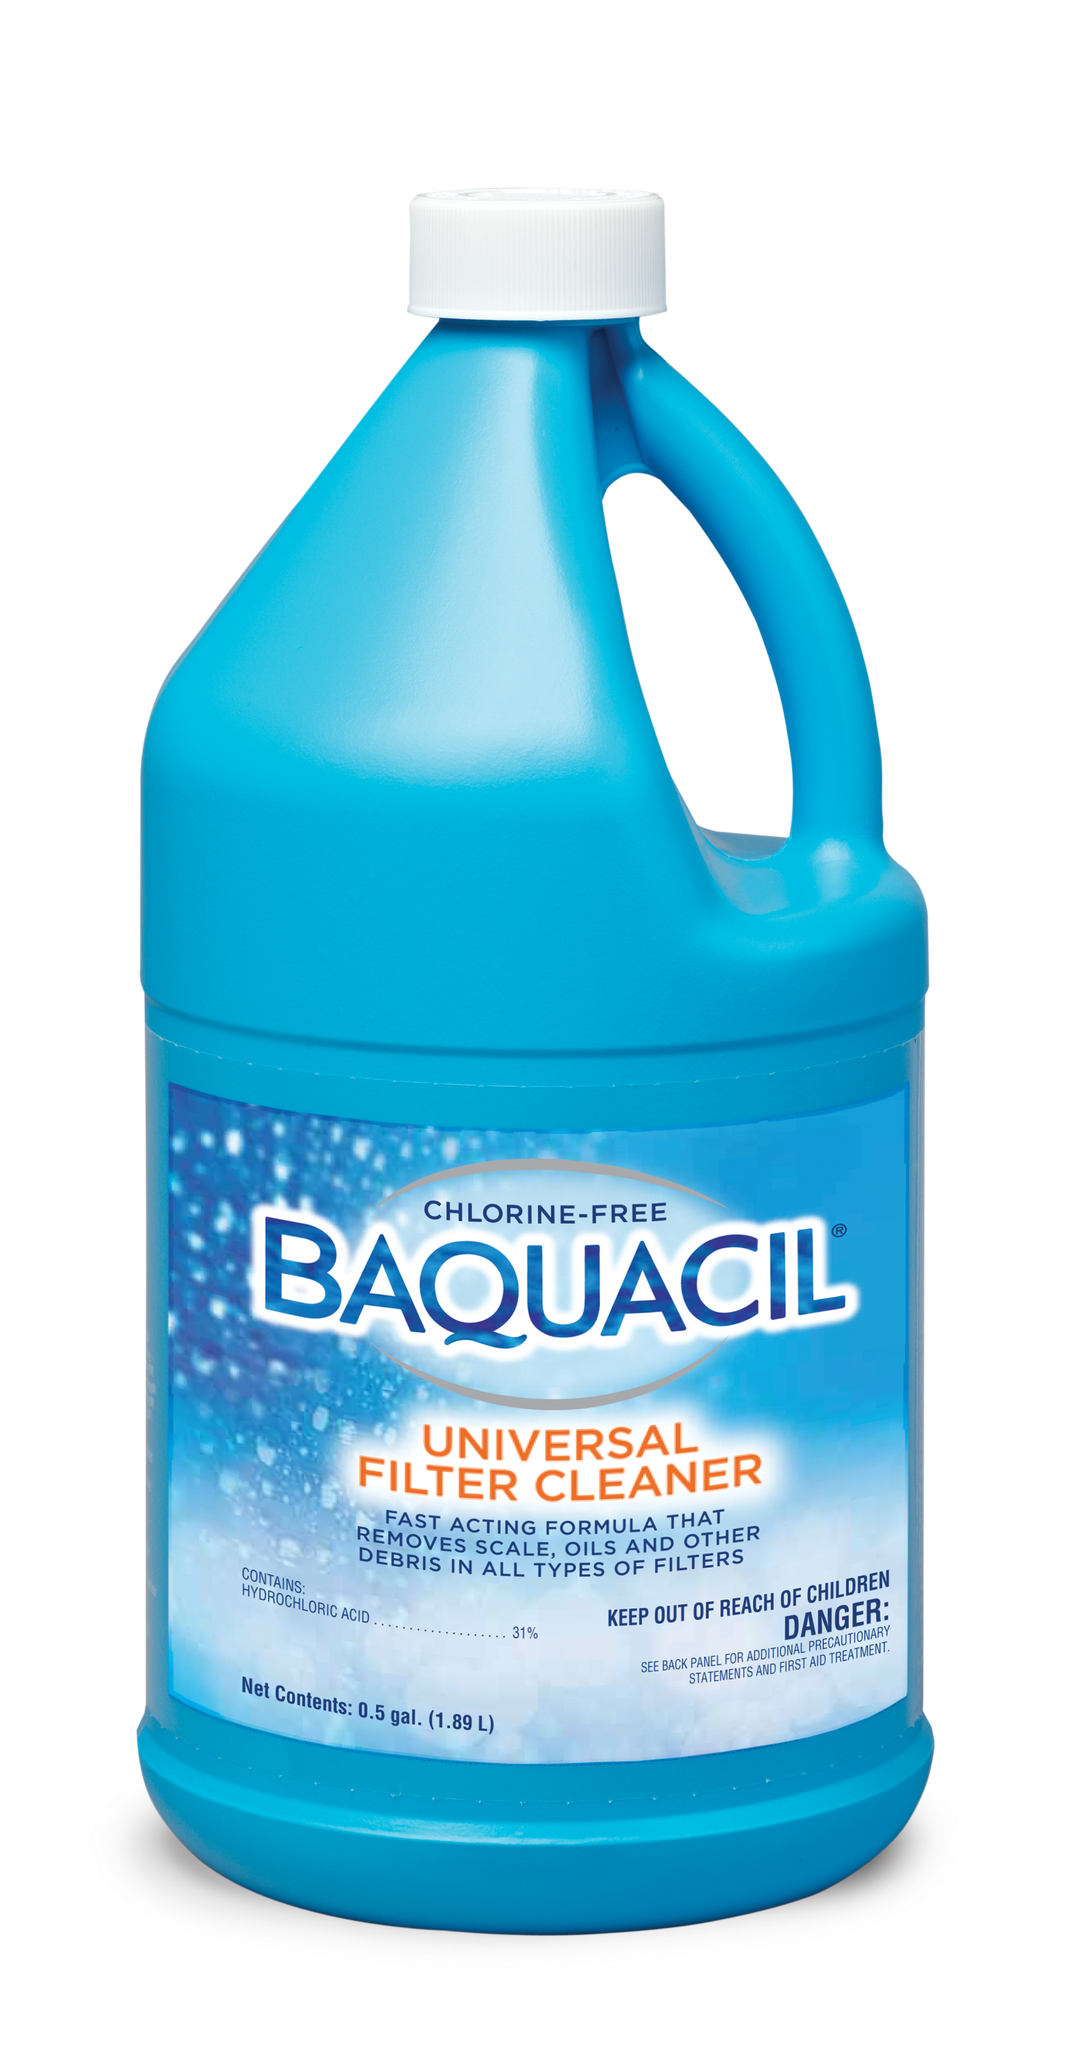 Baquacil Universal Filter Cleaner